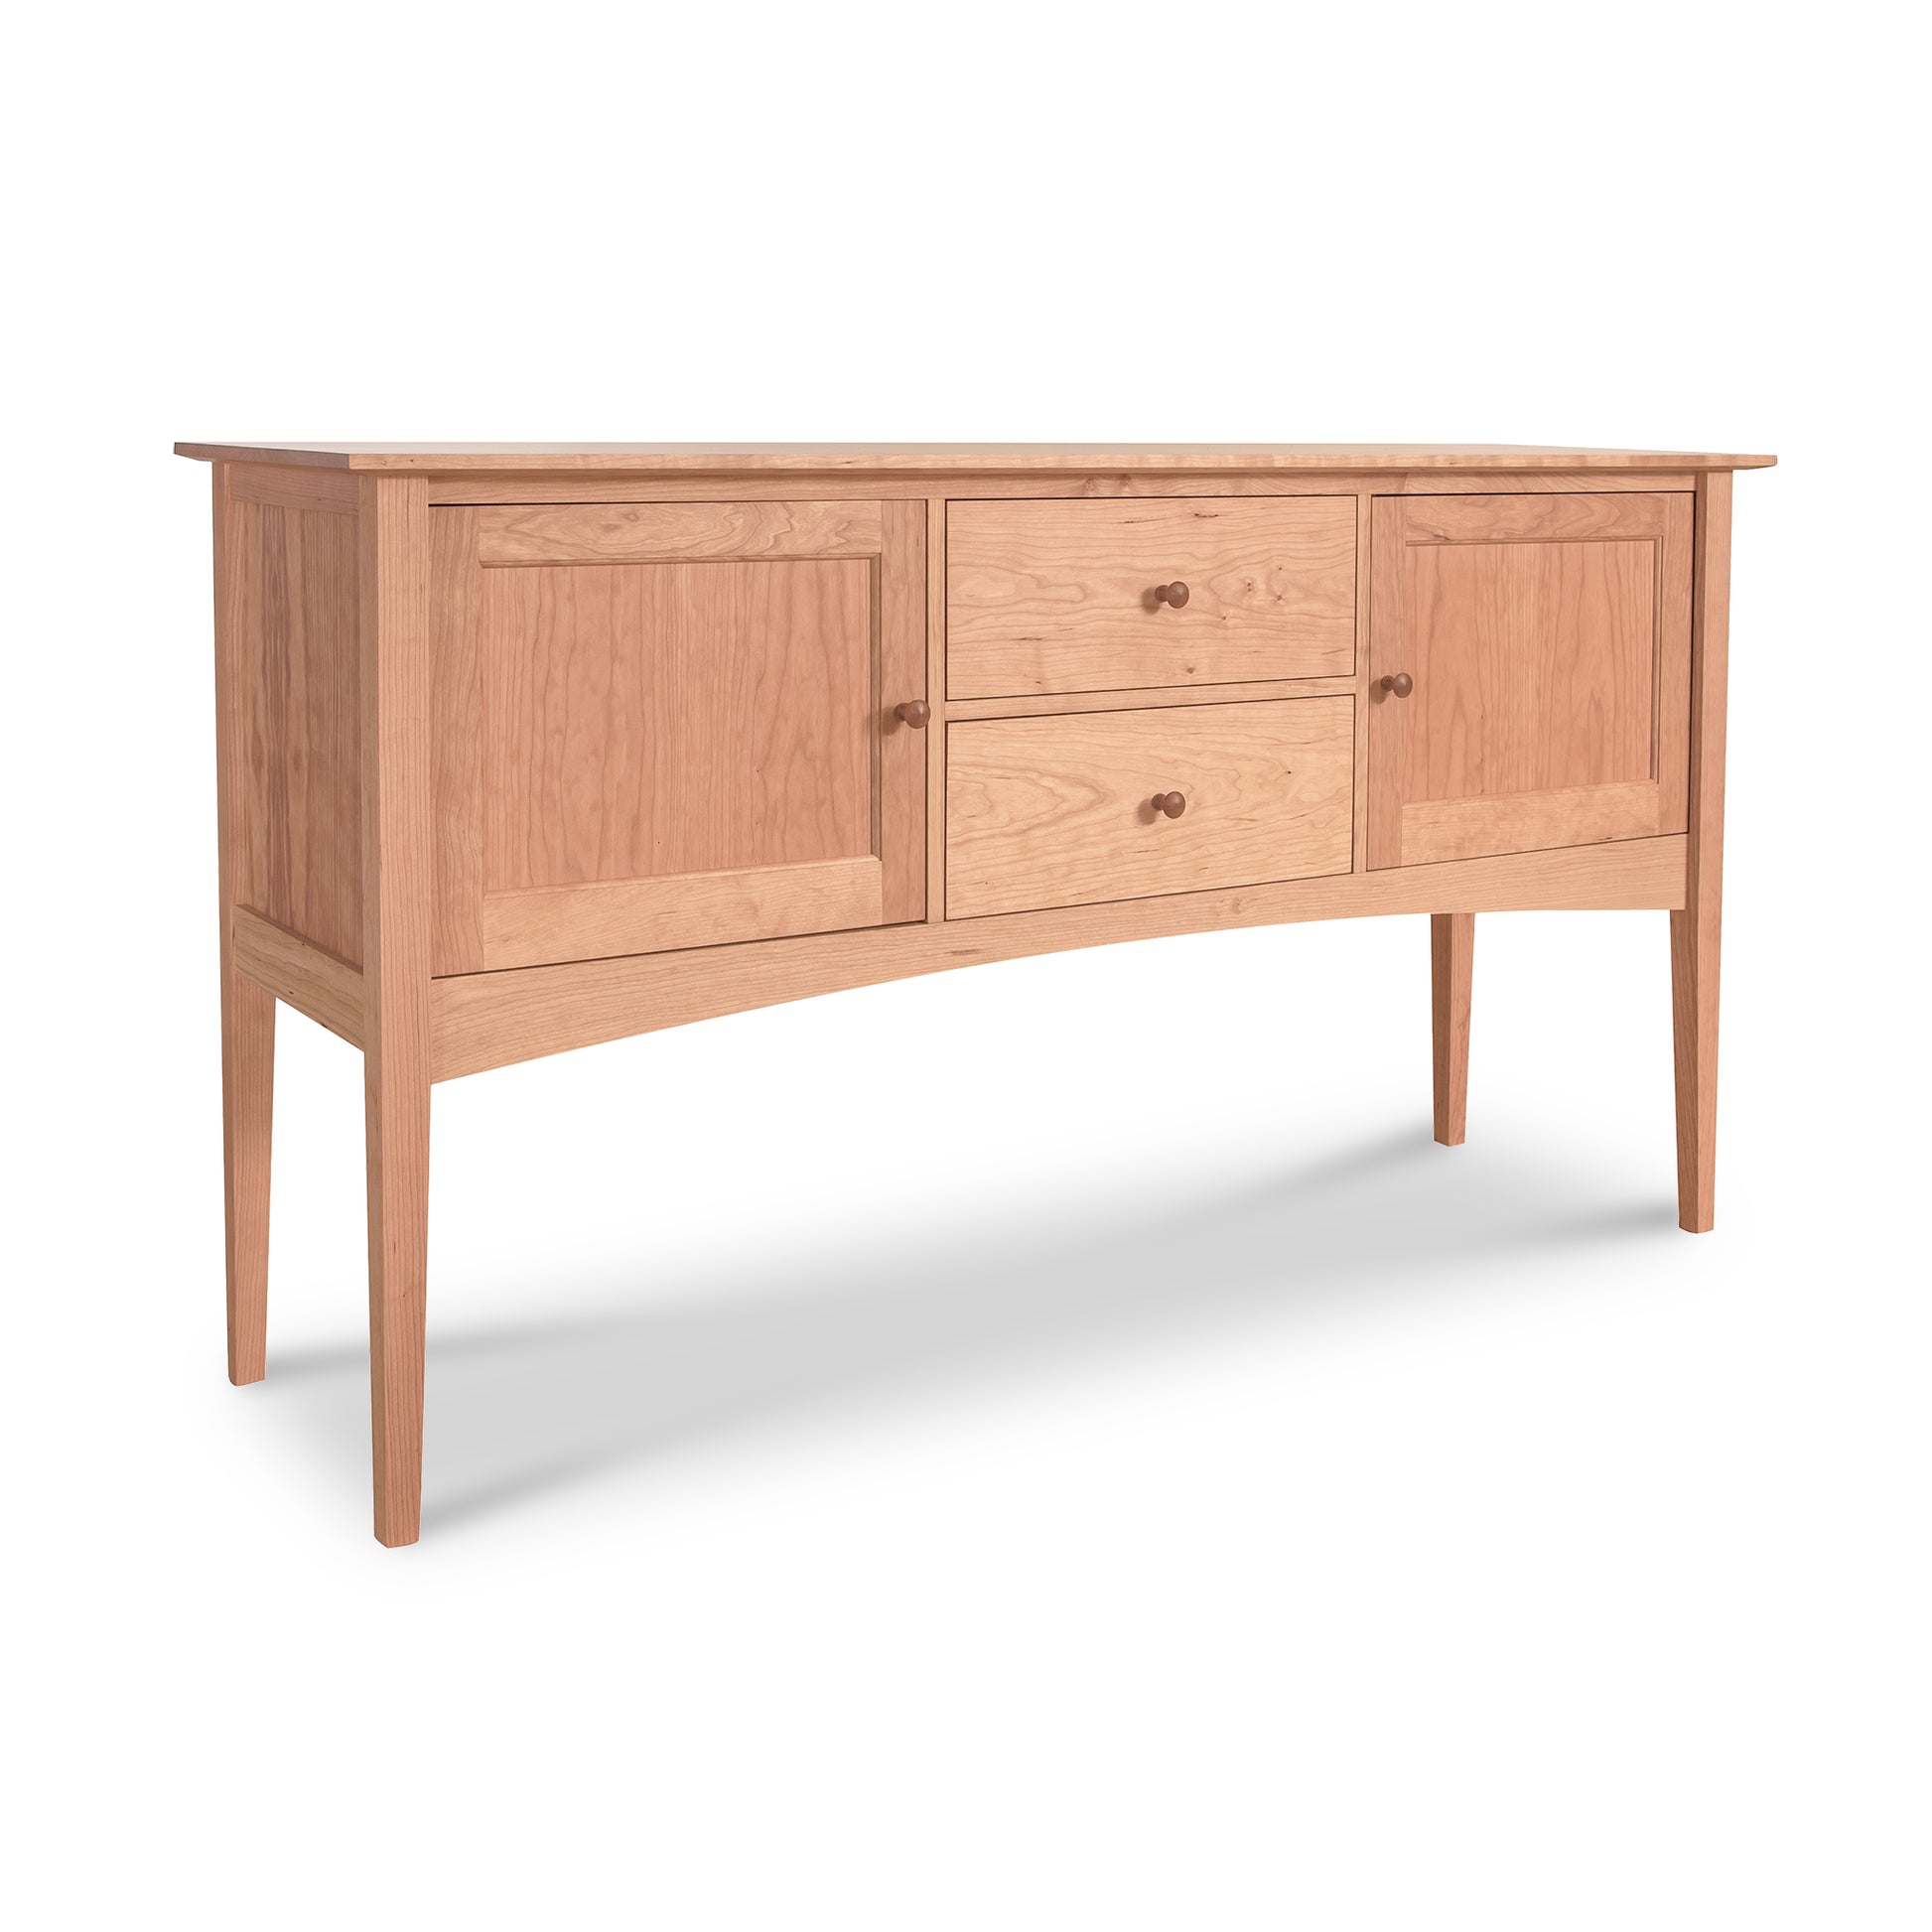 American Shaker Huntboard by Maple Corner Woodworks, with two cabinet doors and three drawers, set on slender legs, against a white background.